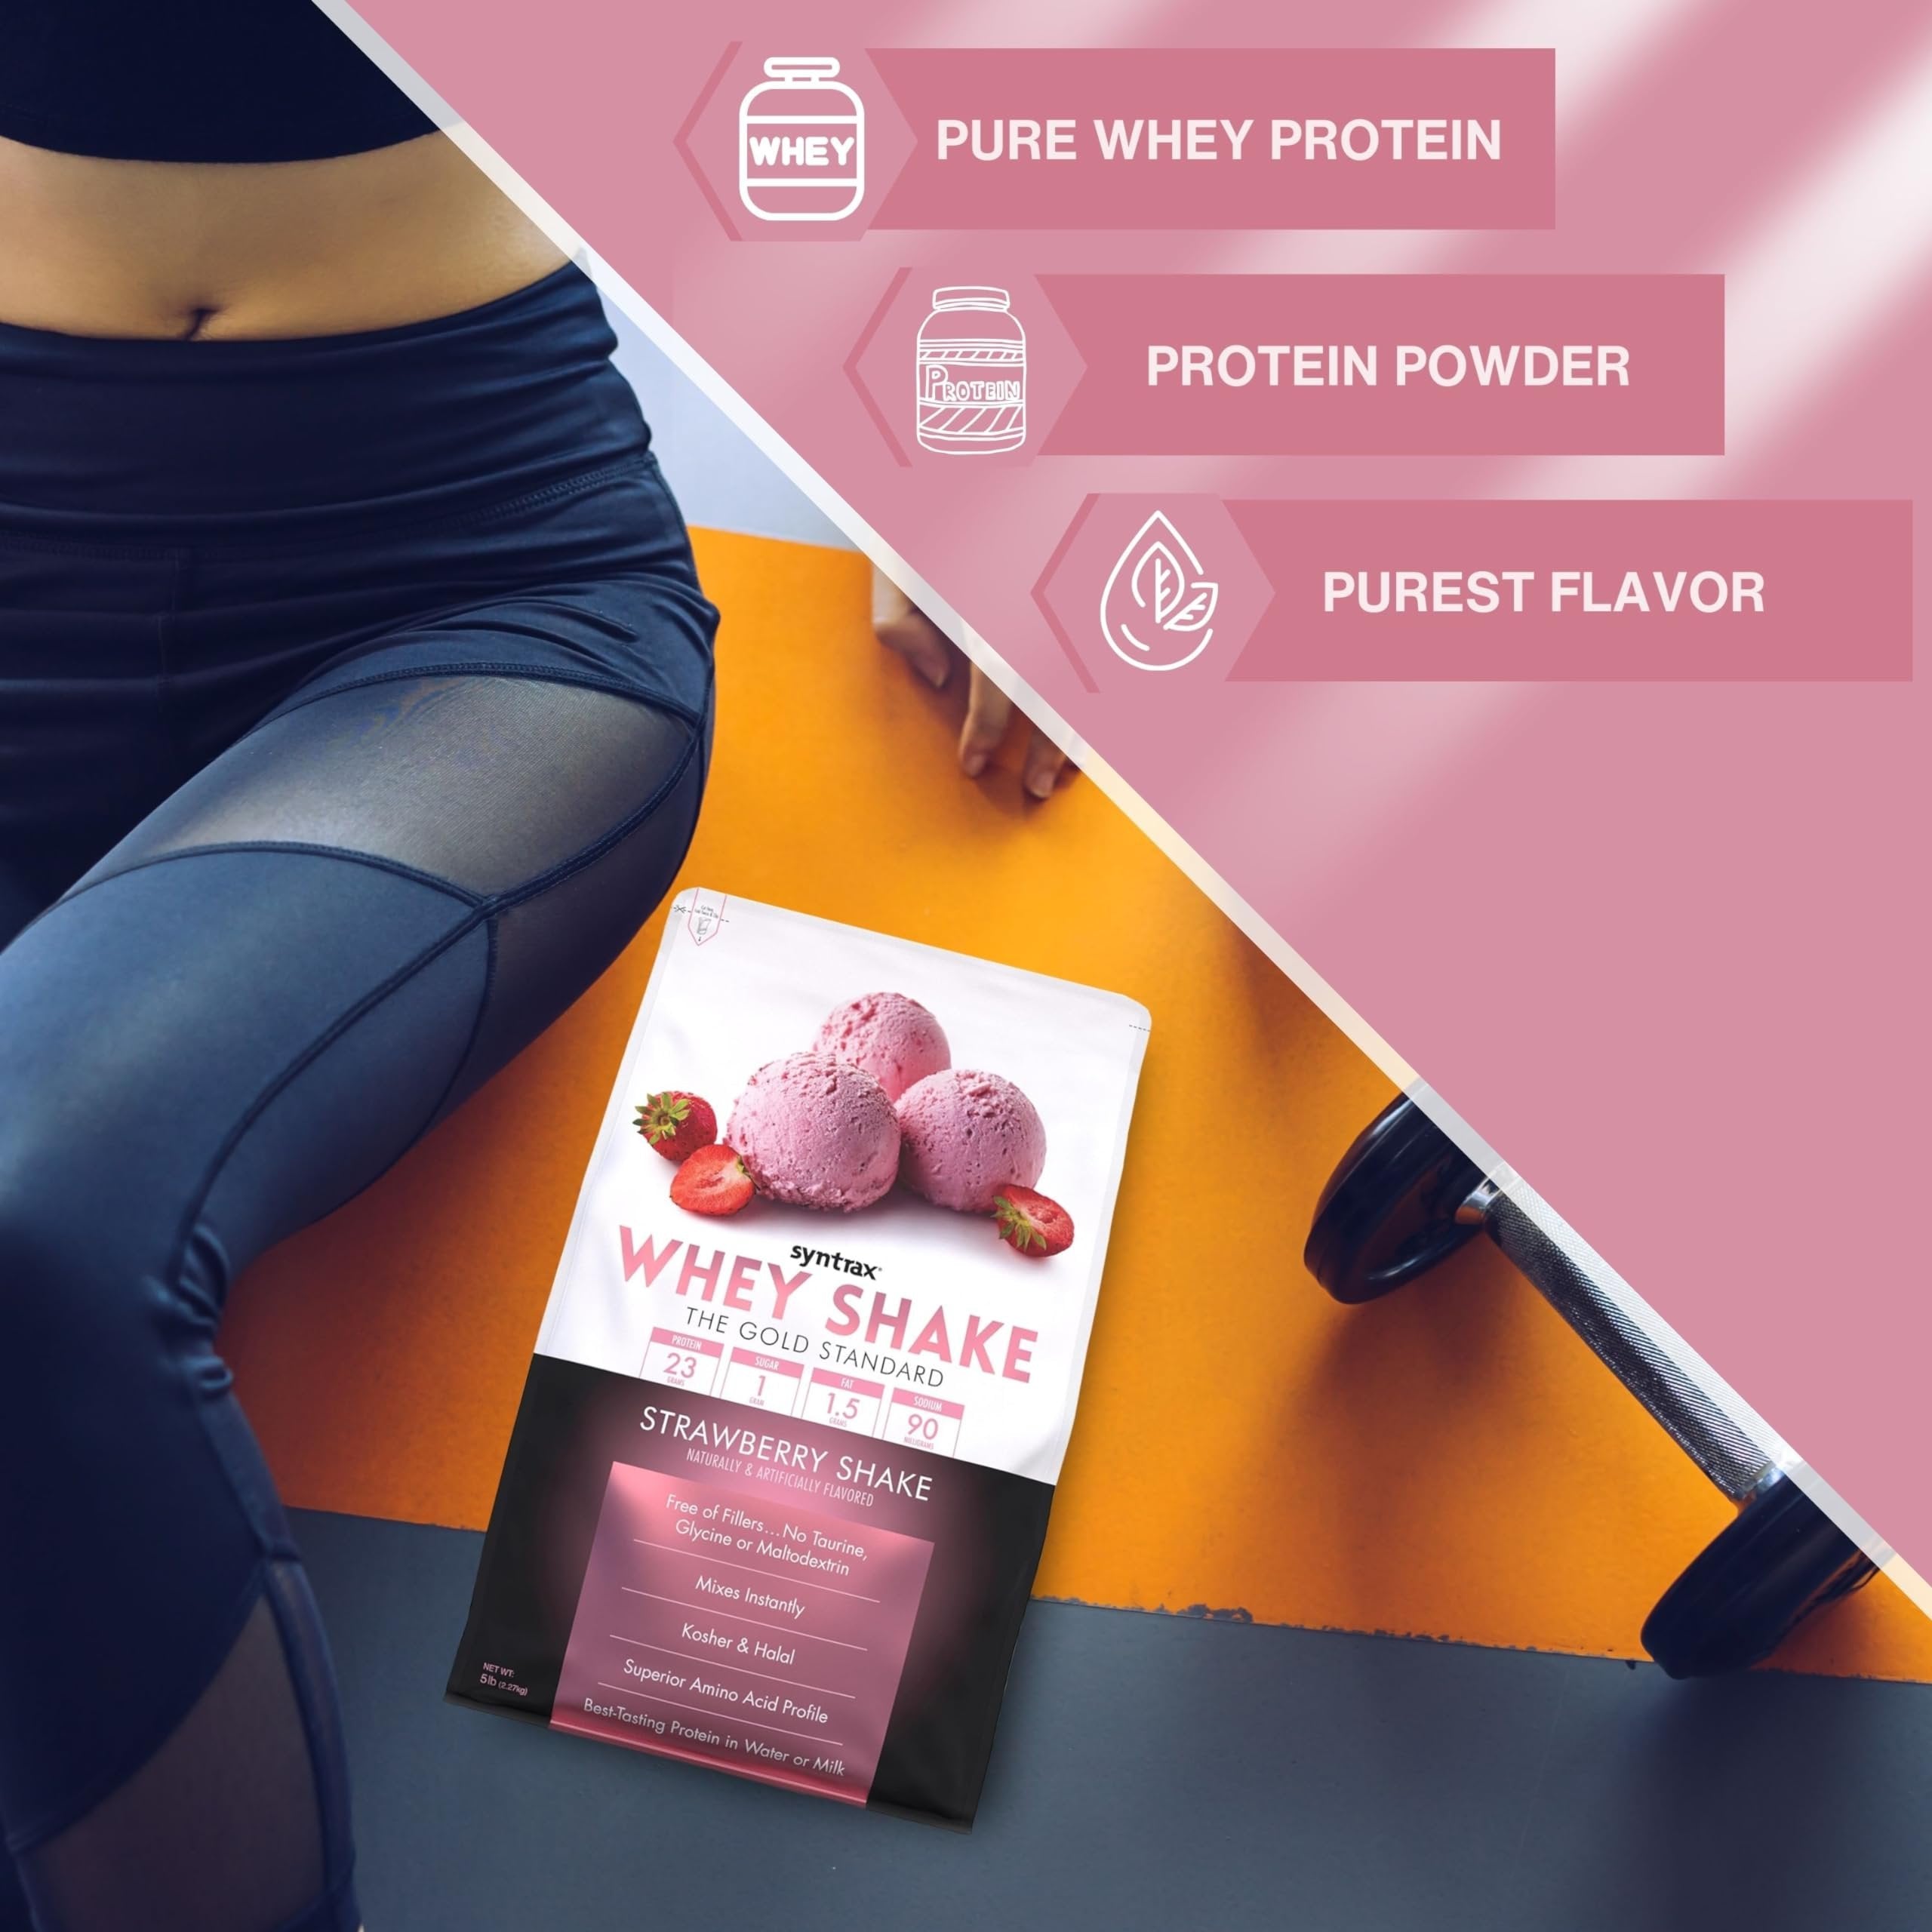 Syntrax Bundle, 2 Items Whey Shake Strawberry Shake Native Grass-Fed Wholesome Denatured Whey Protein Concentrate with Glutamine Peptides 5 Pounds with Worldwide Nutrition Keychain